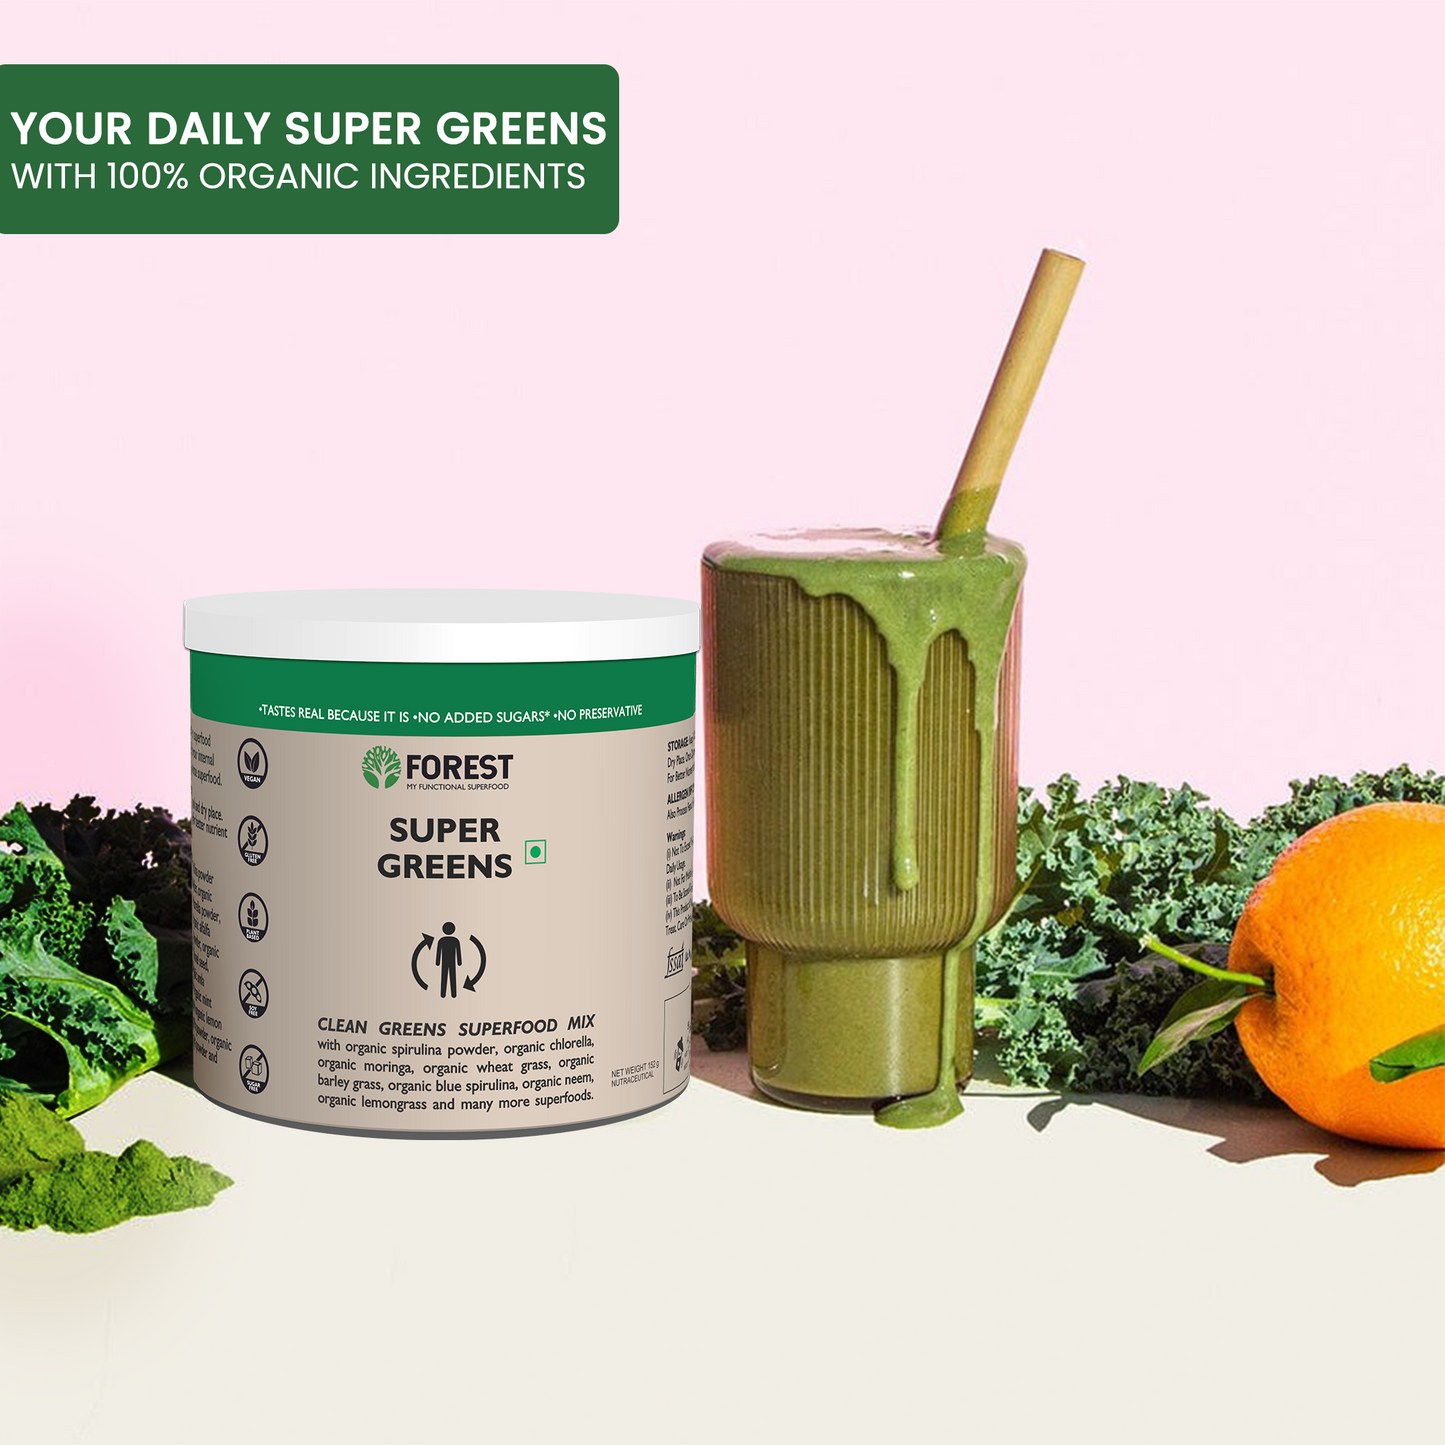 Forest Organic Super Greens Energy, Immunity Booster Formula With Daily Detox Supercharge | Your Metabolism With 18+ Organic Superfoods | Alovera Green Grass, Spirulina, Chlorella & More | Antioxidant, Natural Digestive Enzyme & Prebiotic Blend.